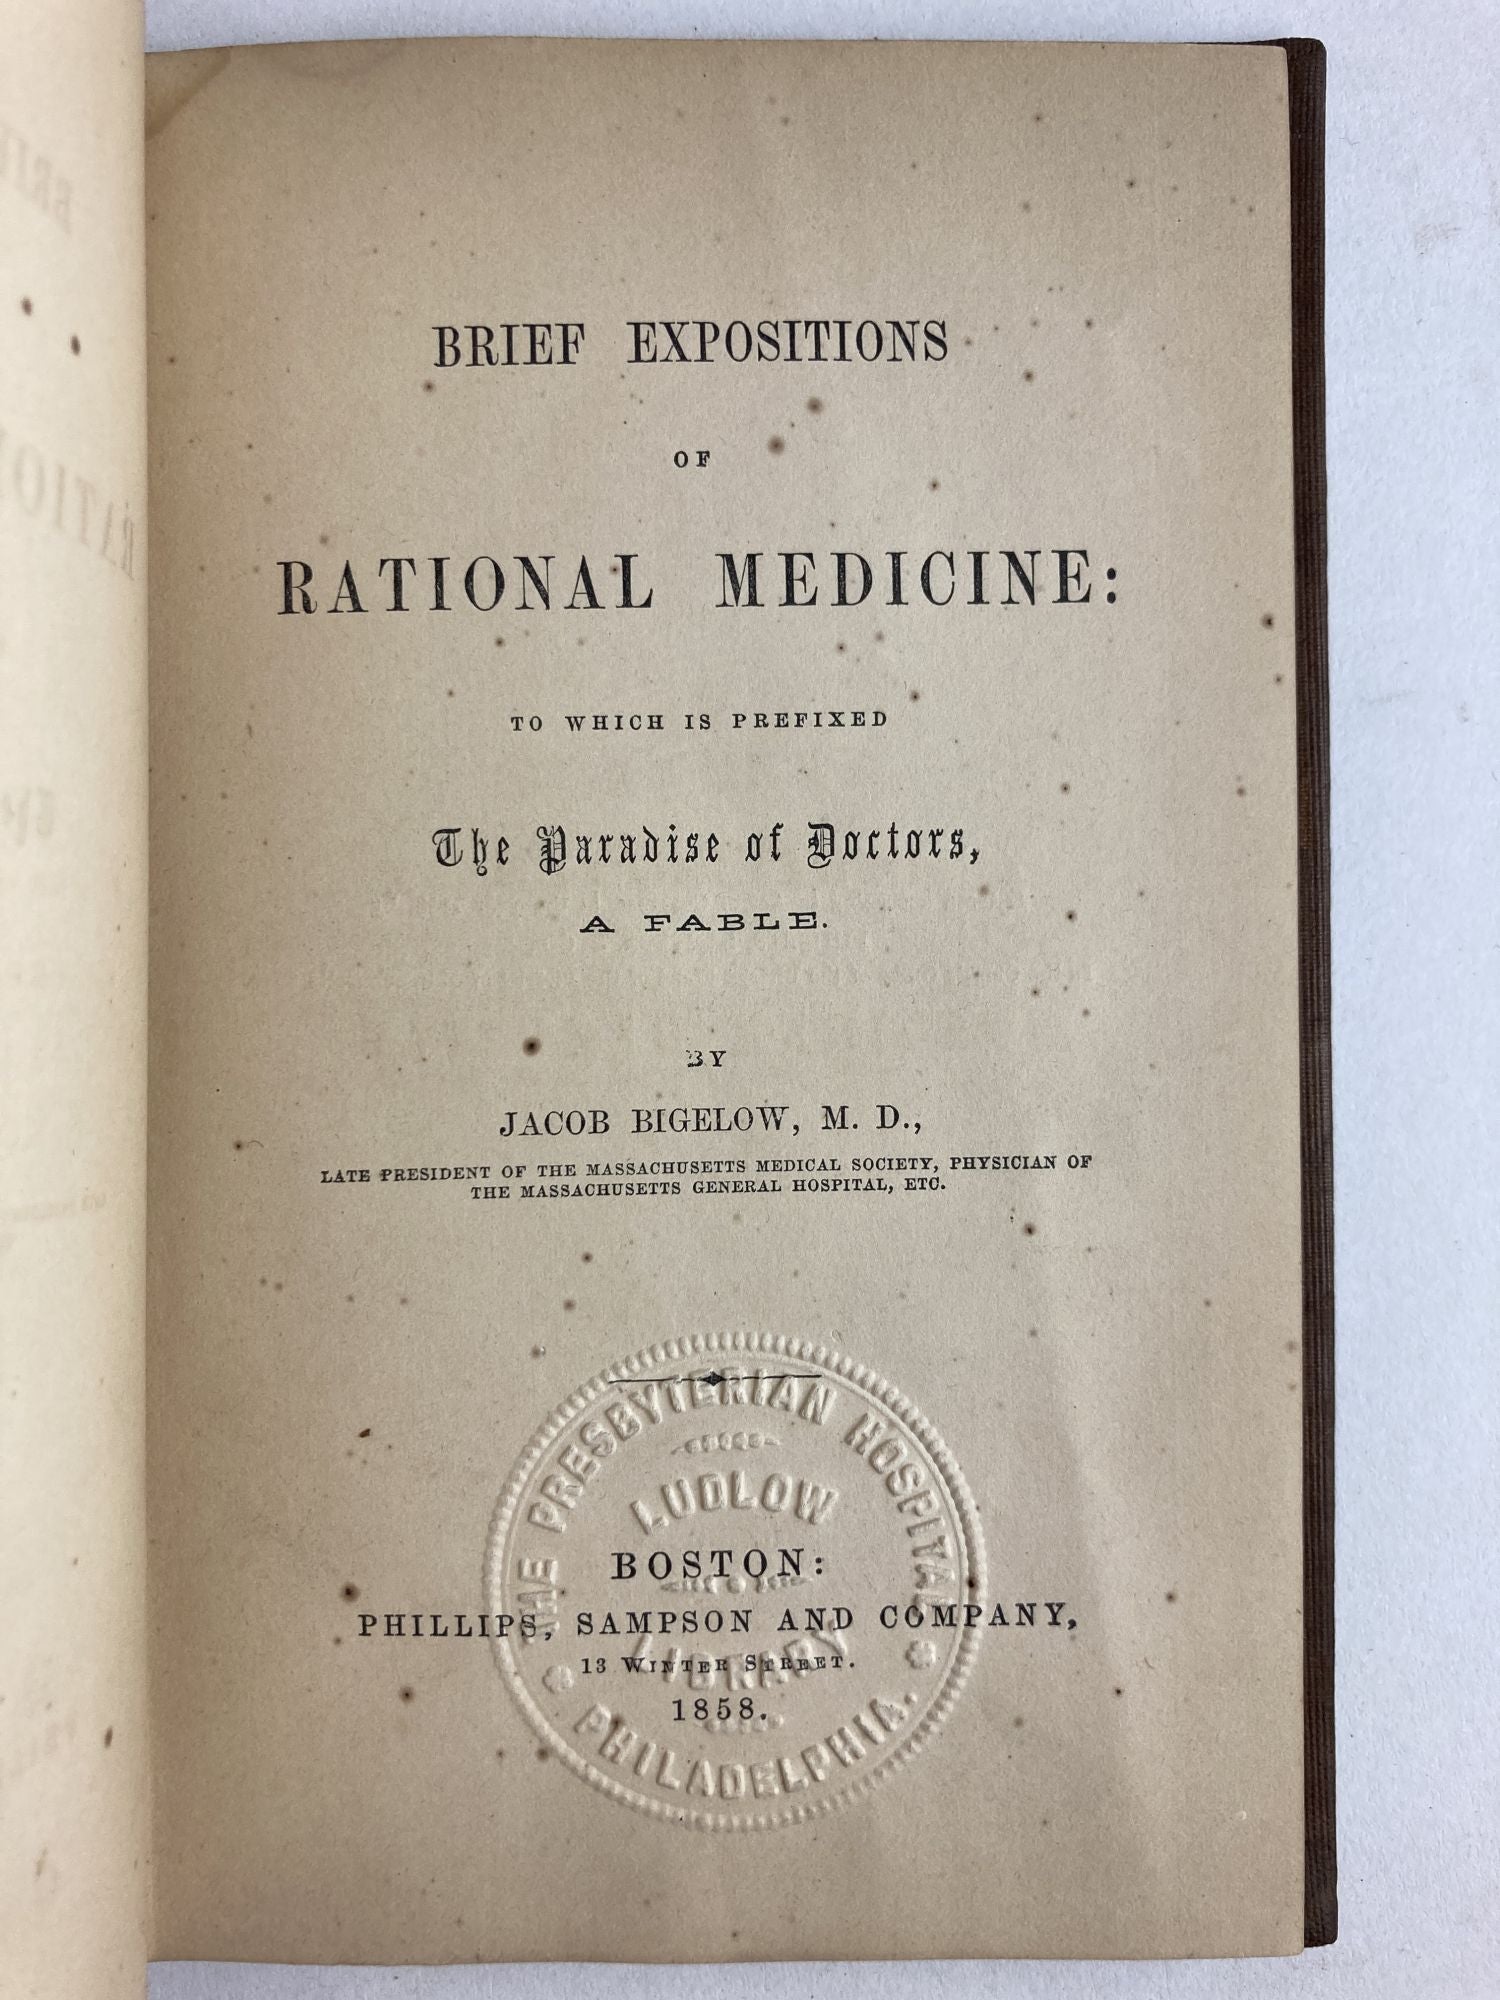 Product Image for BRIEF EXPOSITIONS OF RATIONAL MEDICINE: TO WHICH IS PREFIXED THE PARADISE OF DOCTORS, A FABLE (Inscribed)